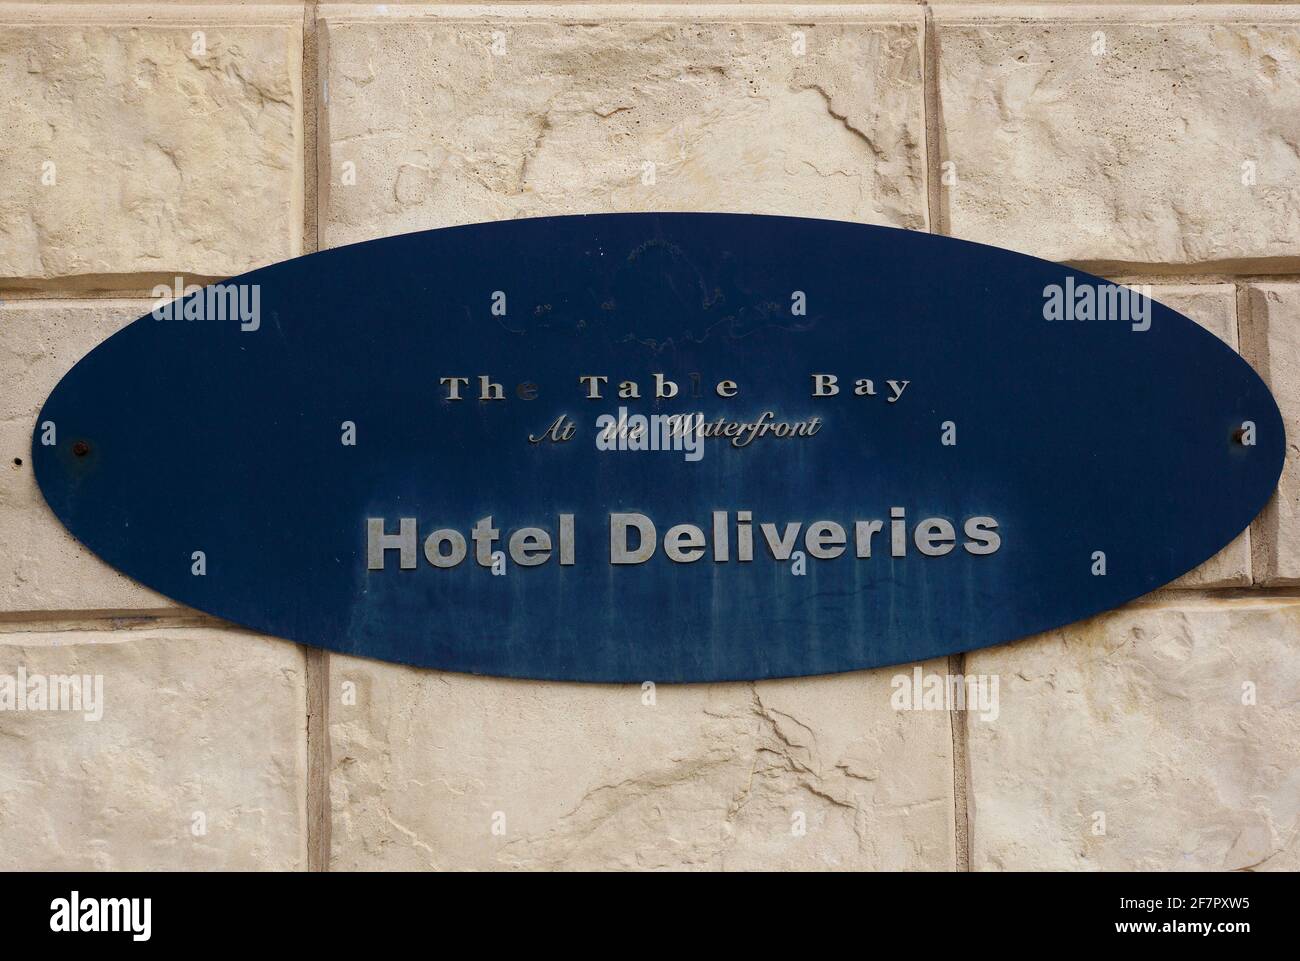 Hotel Deliveries sign at The Table Bay Hotel, V&A Waterfront, Cape Town, South Africa. Stock Photo